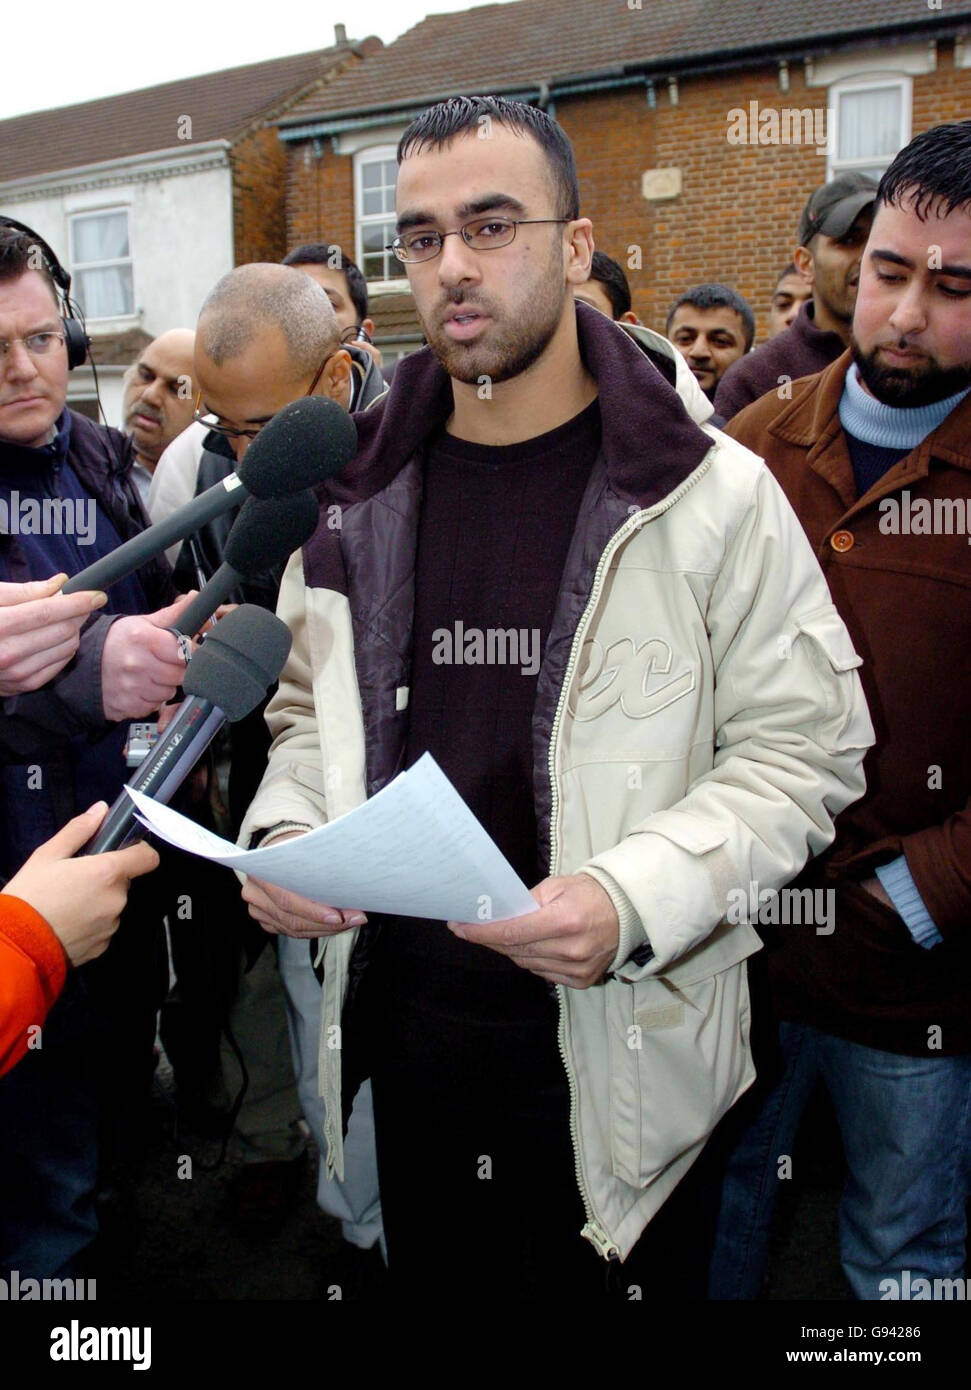 Omar Khayam speaks to the press outside his Bedford home, Monday February 6, 2006. Mr Khayam, who dressed as a suicide bomber during protests outside the Danish embassy in London on Saturday, apologised 'wholeheartedly' to the families of the July 7 bombings and said it was not his aim to cause offence. See PA story POLITICS Cartoons. PRESS ASSOCIATION photo. Photo credit should read: Chris Radburn/PA. Stock Photo